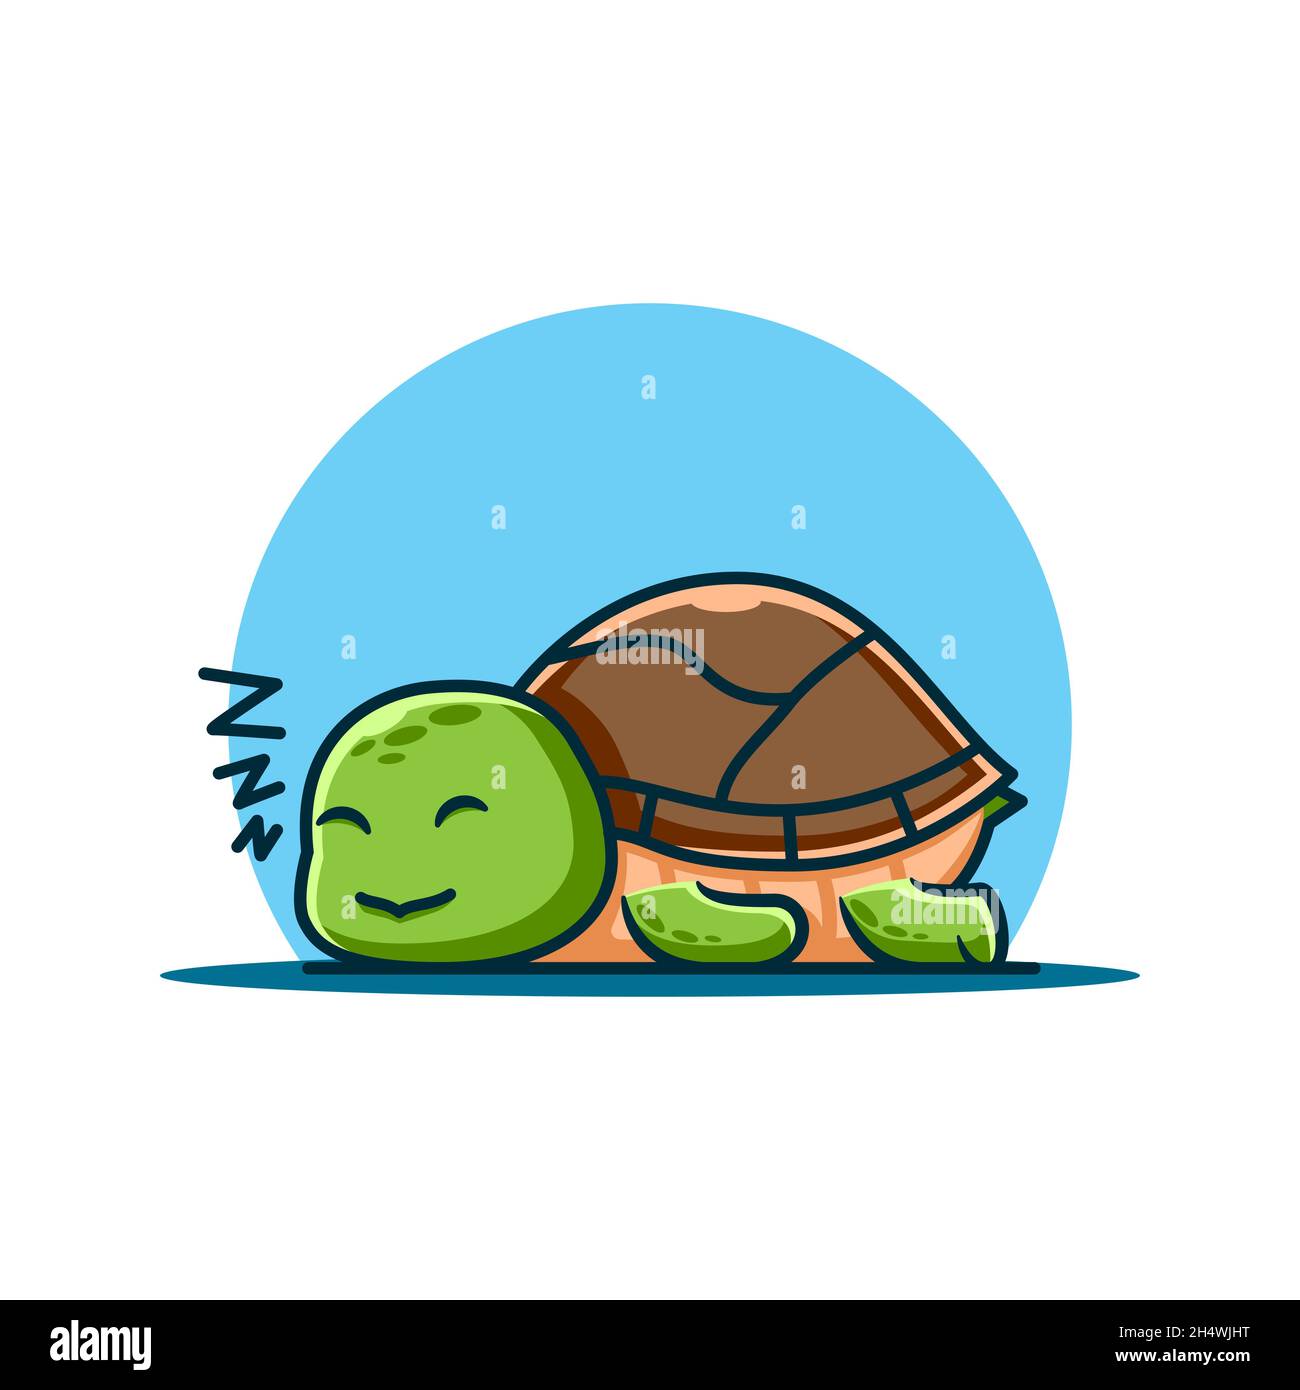 vector illustration. create an illustrated image of a cute turtle sleeping soundly. flat cartoon, character style. Stock Vector